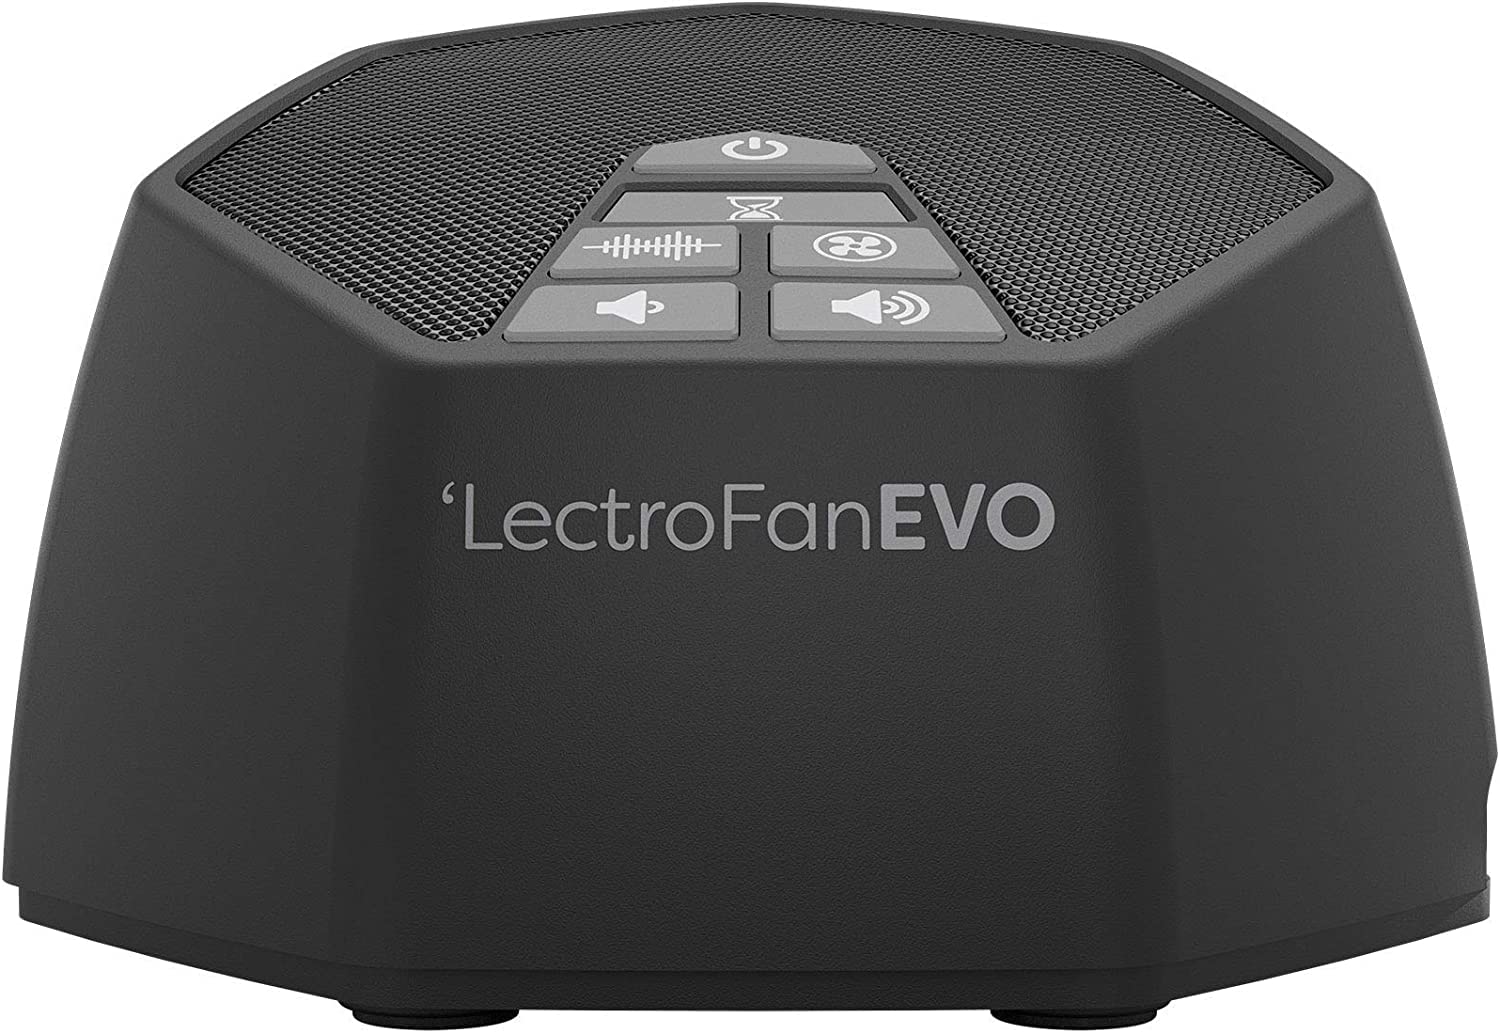 LectroFan EVO Guaranteed Non-Looping Sleep Sound Machine with 22 Unique Fan Sounds, White Noise Machine for Sleeping and Ocean Sounds, with Sleep Timer - Black (Renewed)